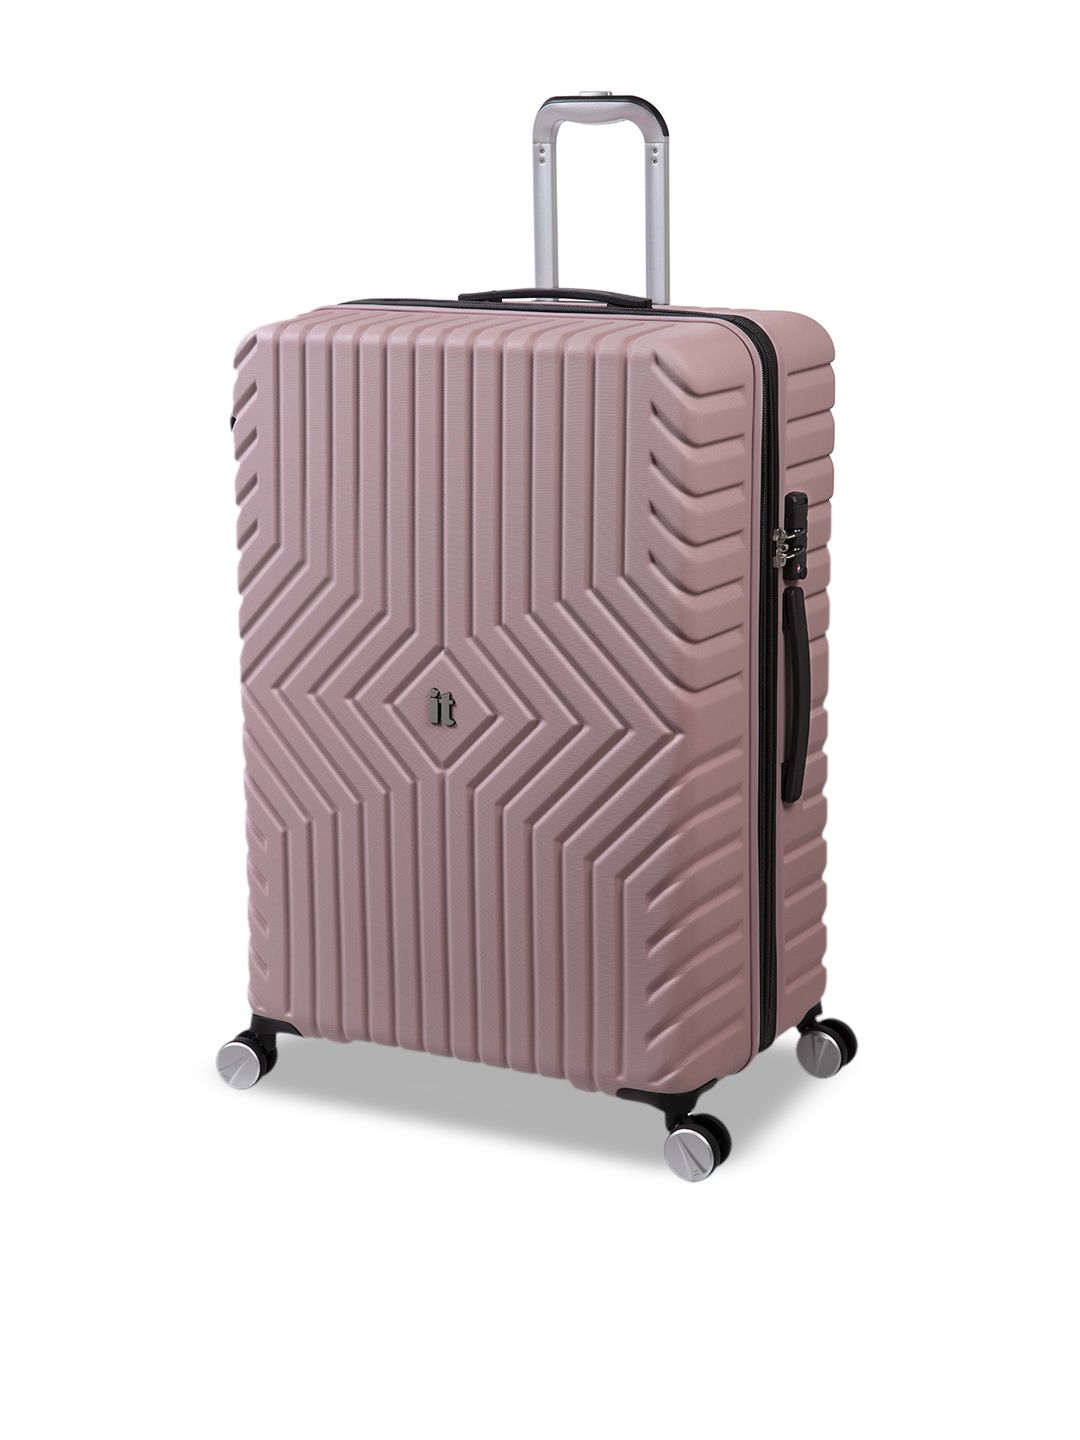 IT luggage Pink Textured Hard-Sided Large Trolley Bag Price in India